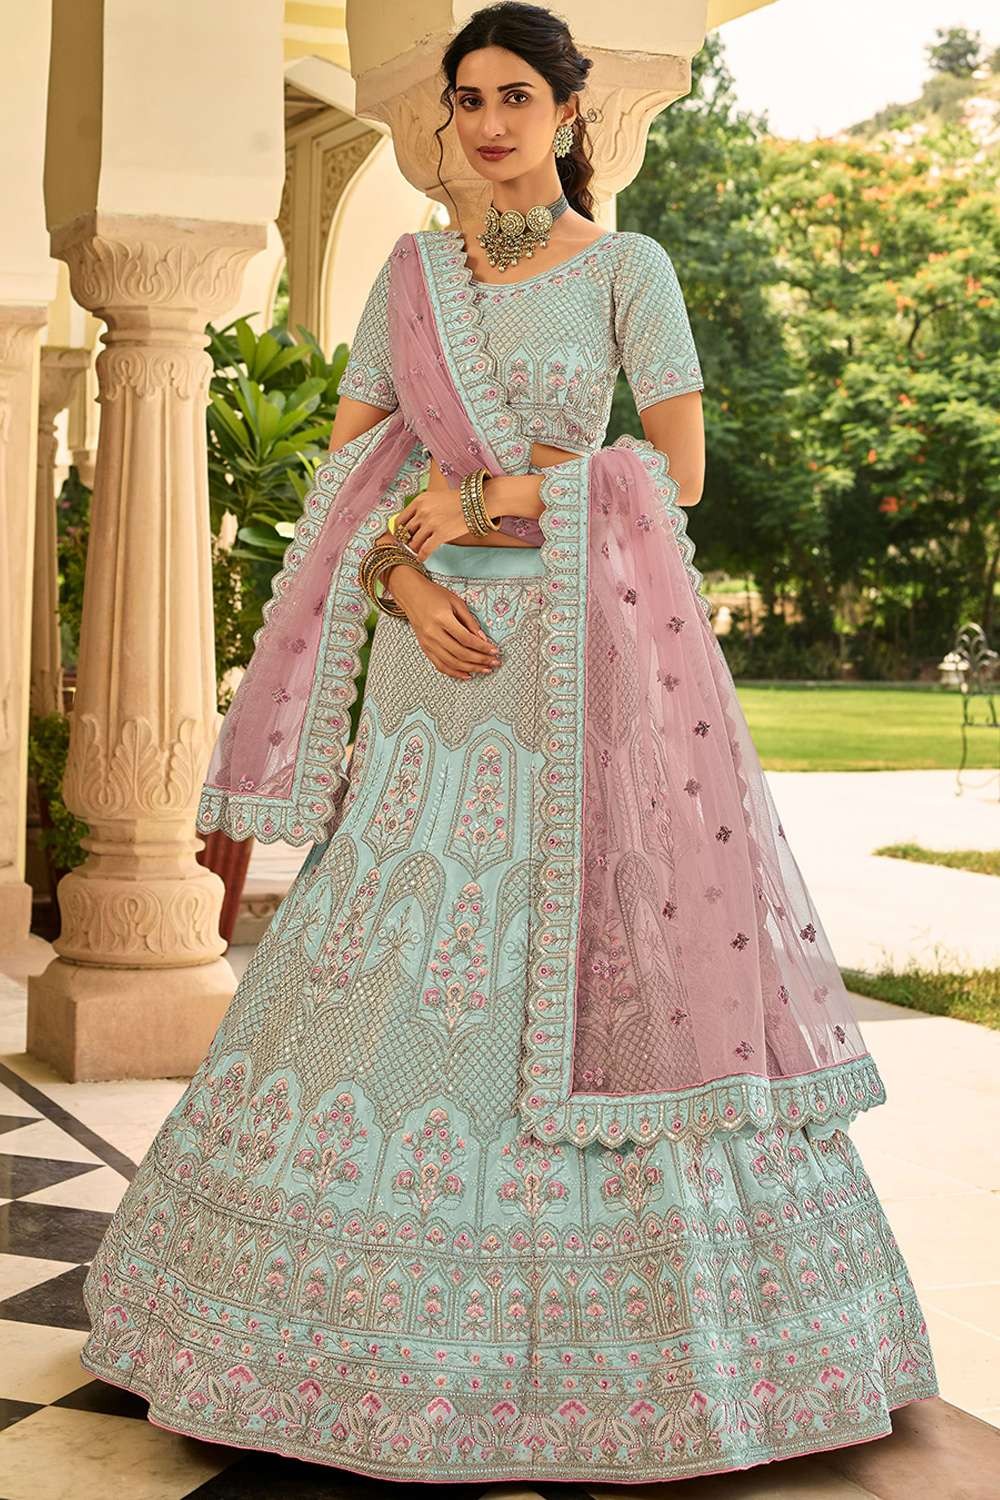 Sky blue colored Embroidered Lehenga - Rent